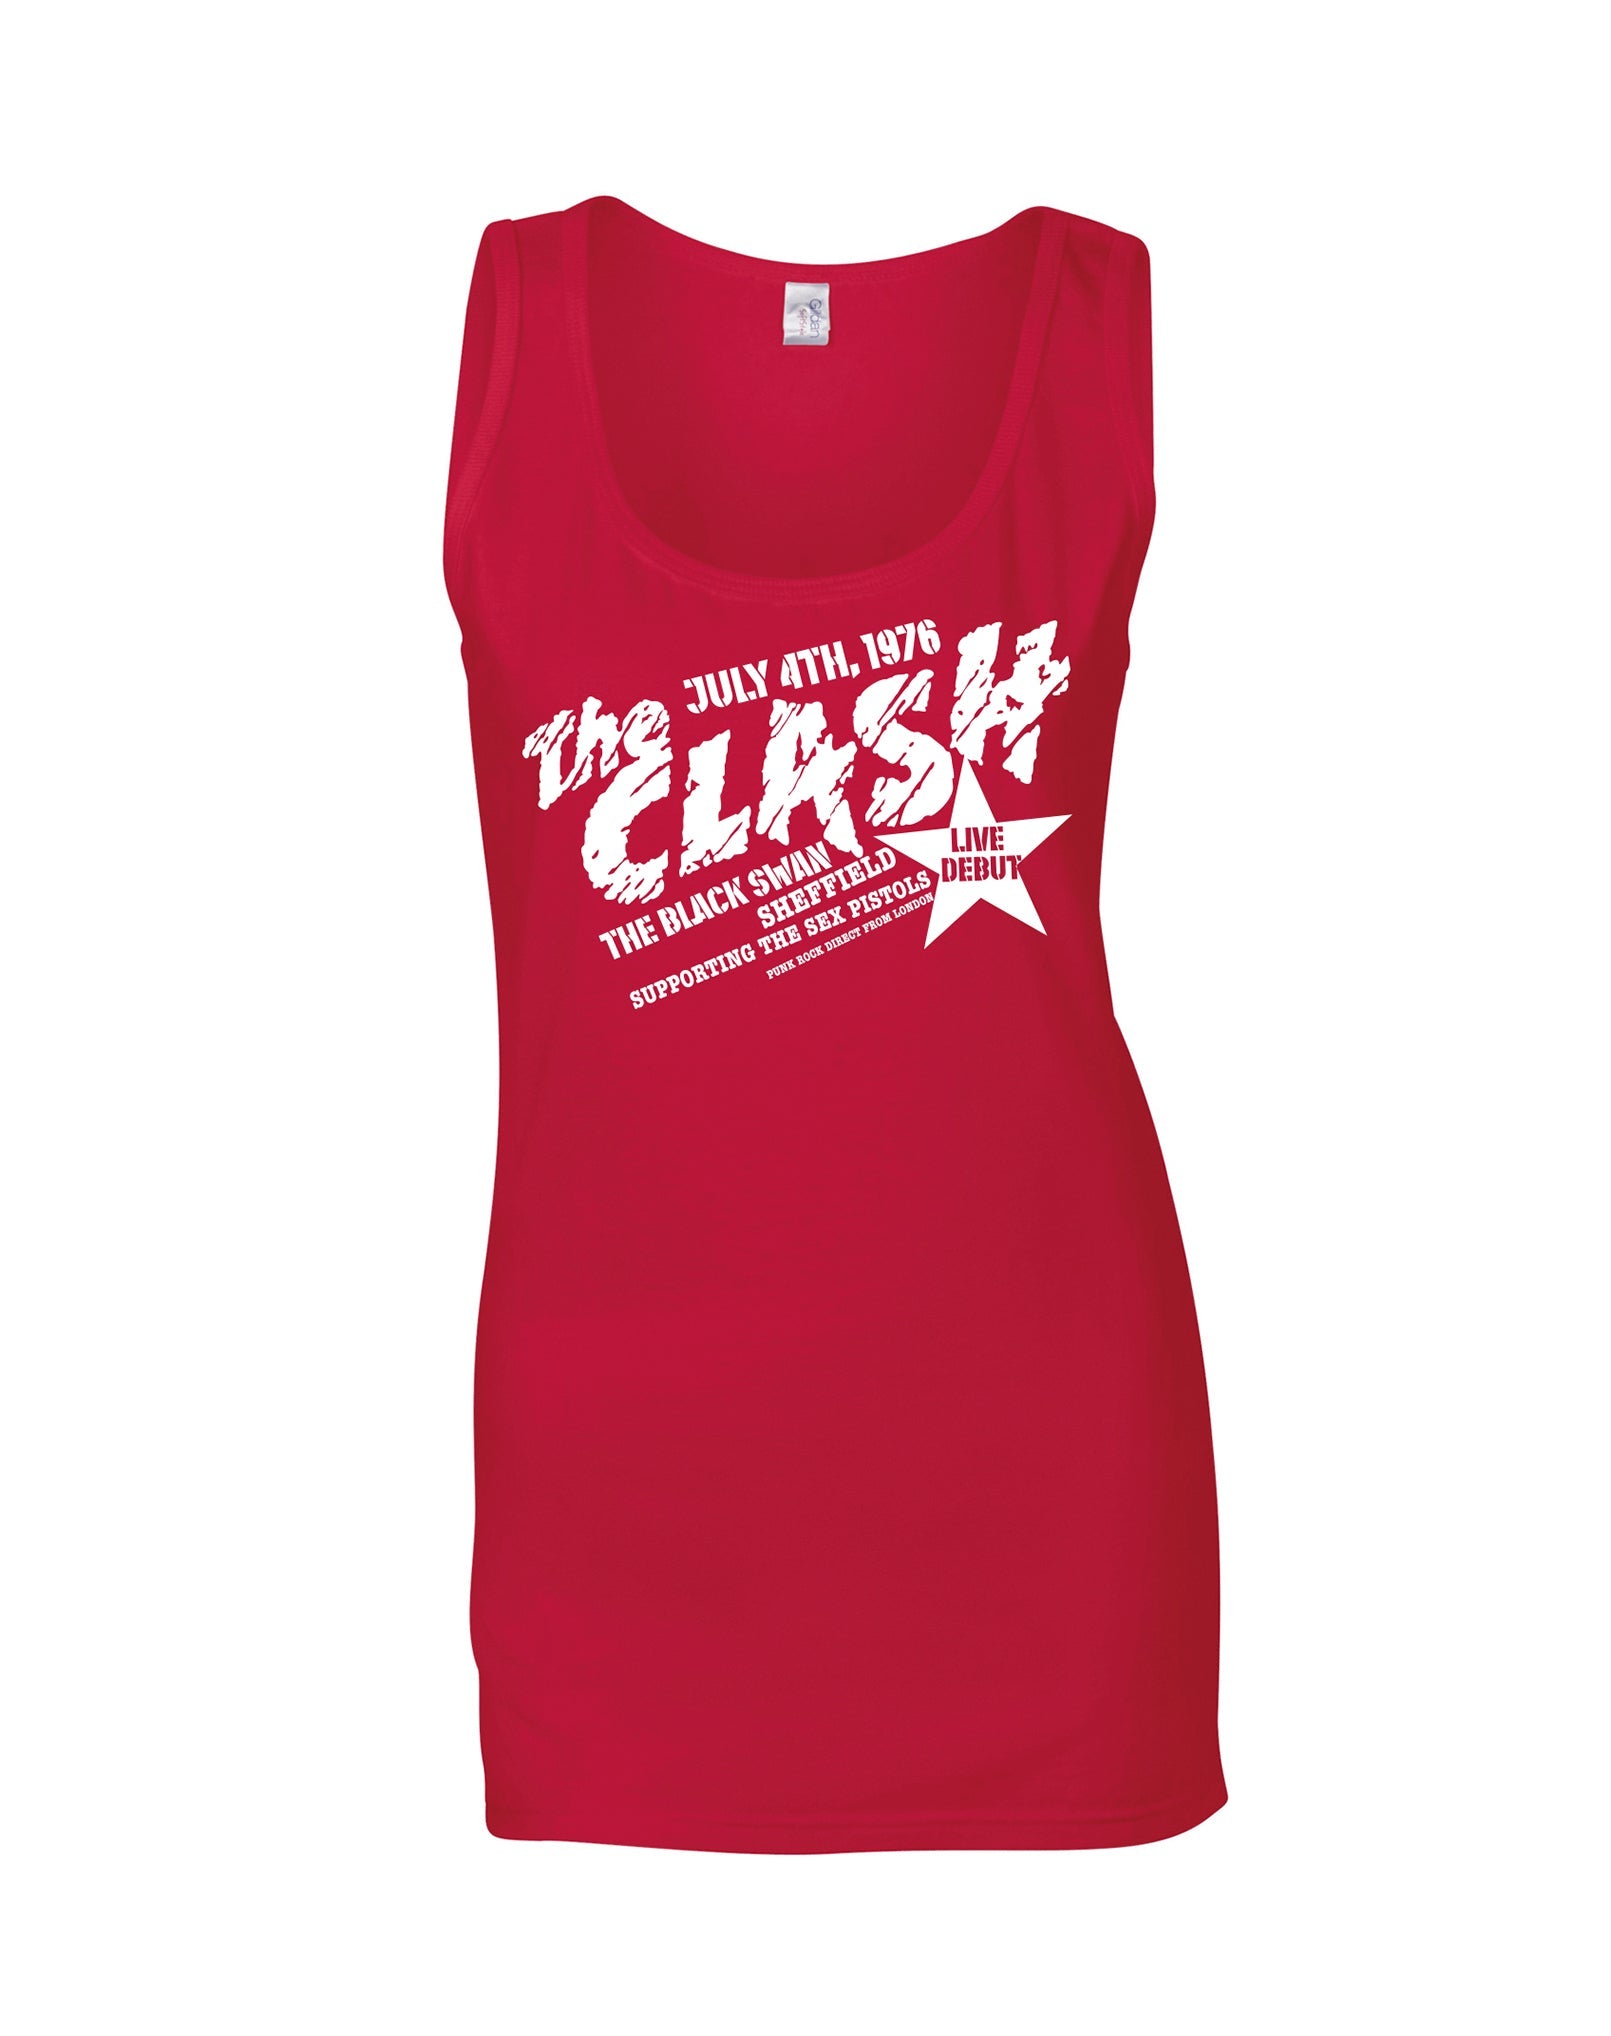 The Clash at the Black Swan ladies fit vest - various colours. - Dirty Stop Outs